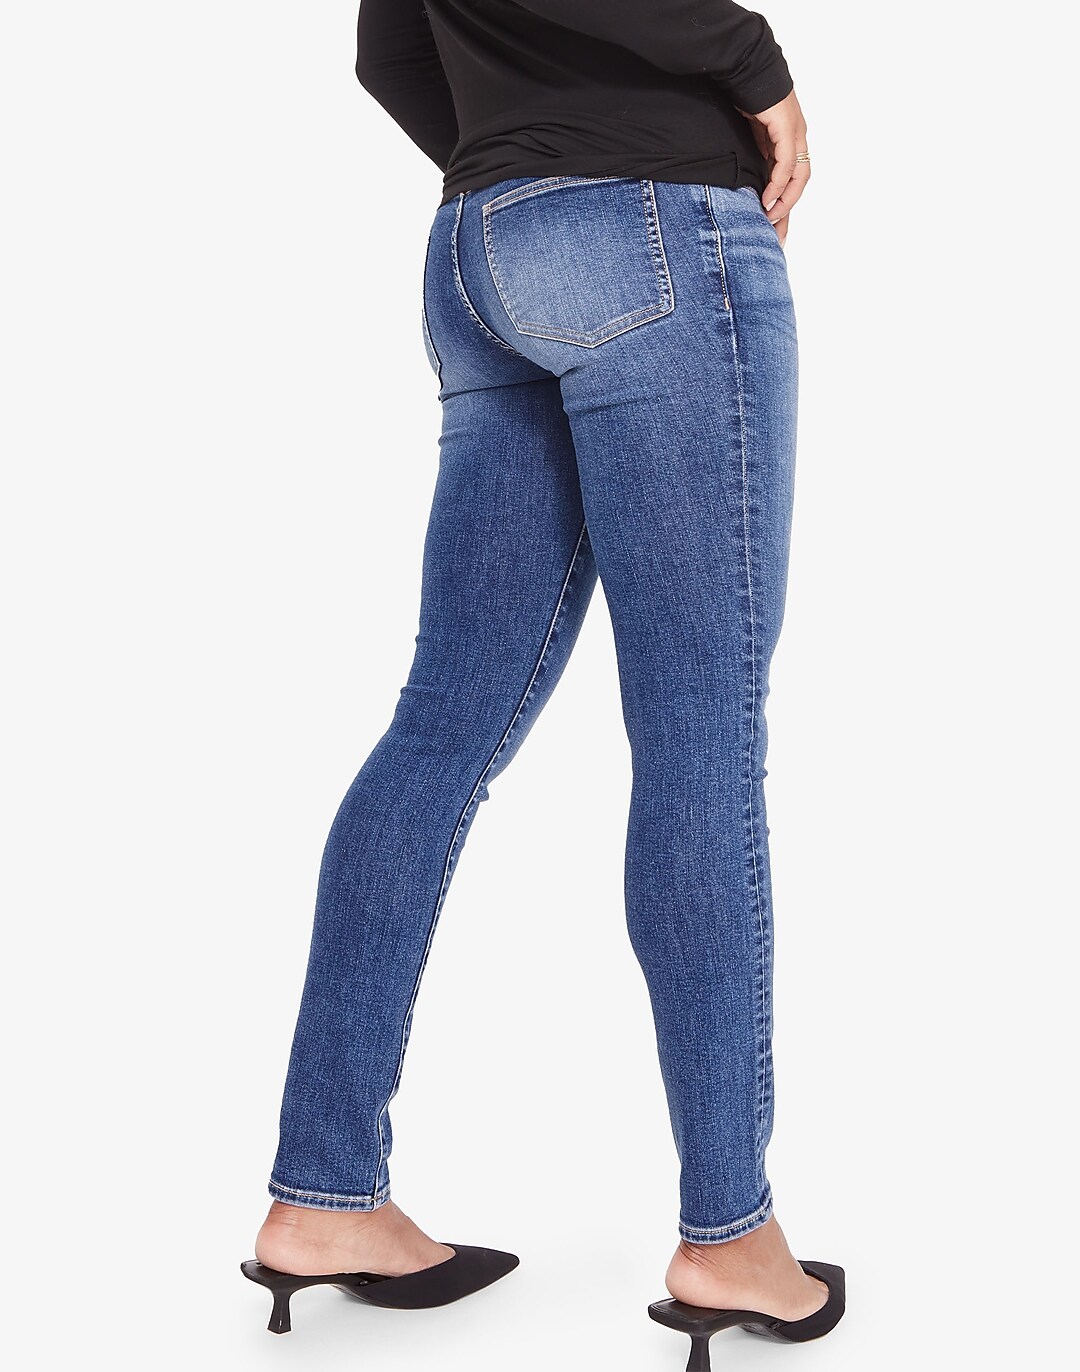 HATCH Collection The Over the Bump Slim Maternity Jean